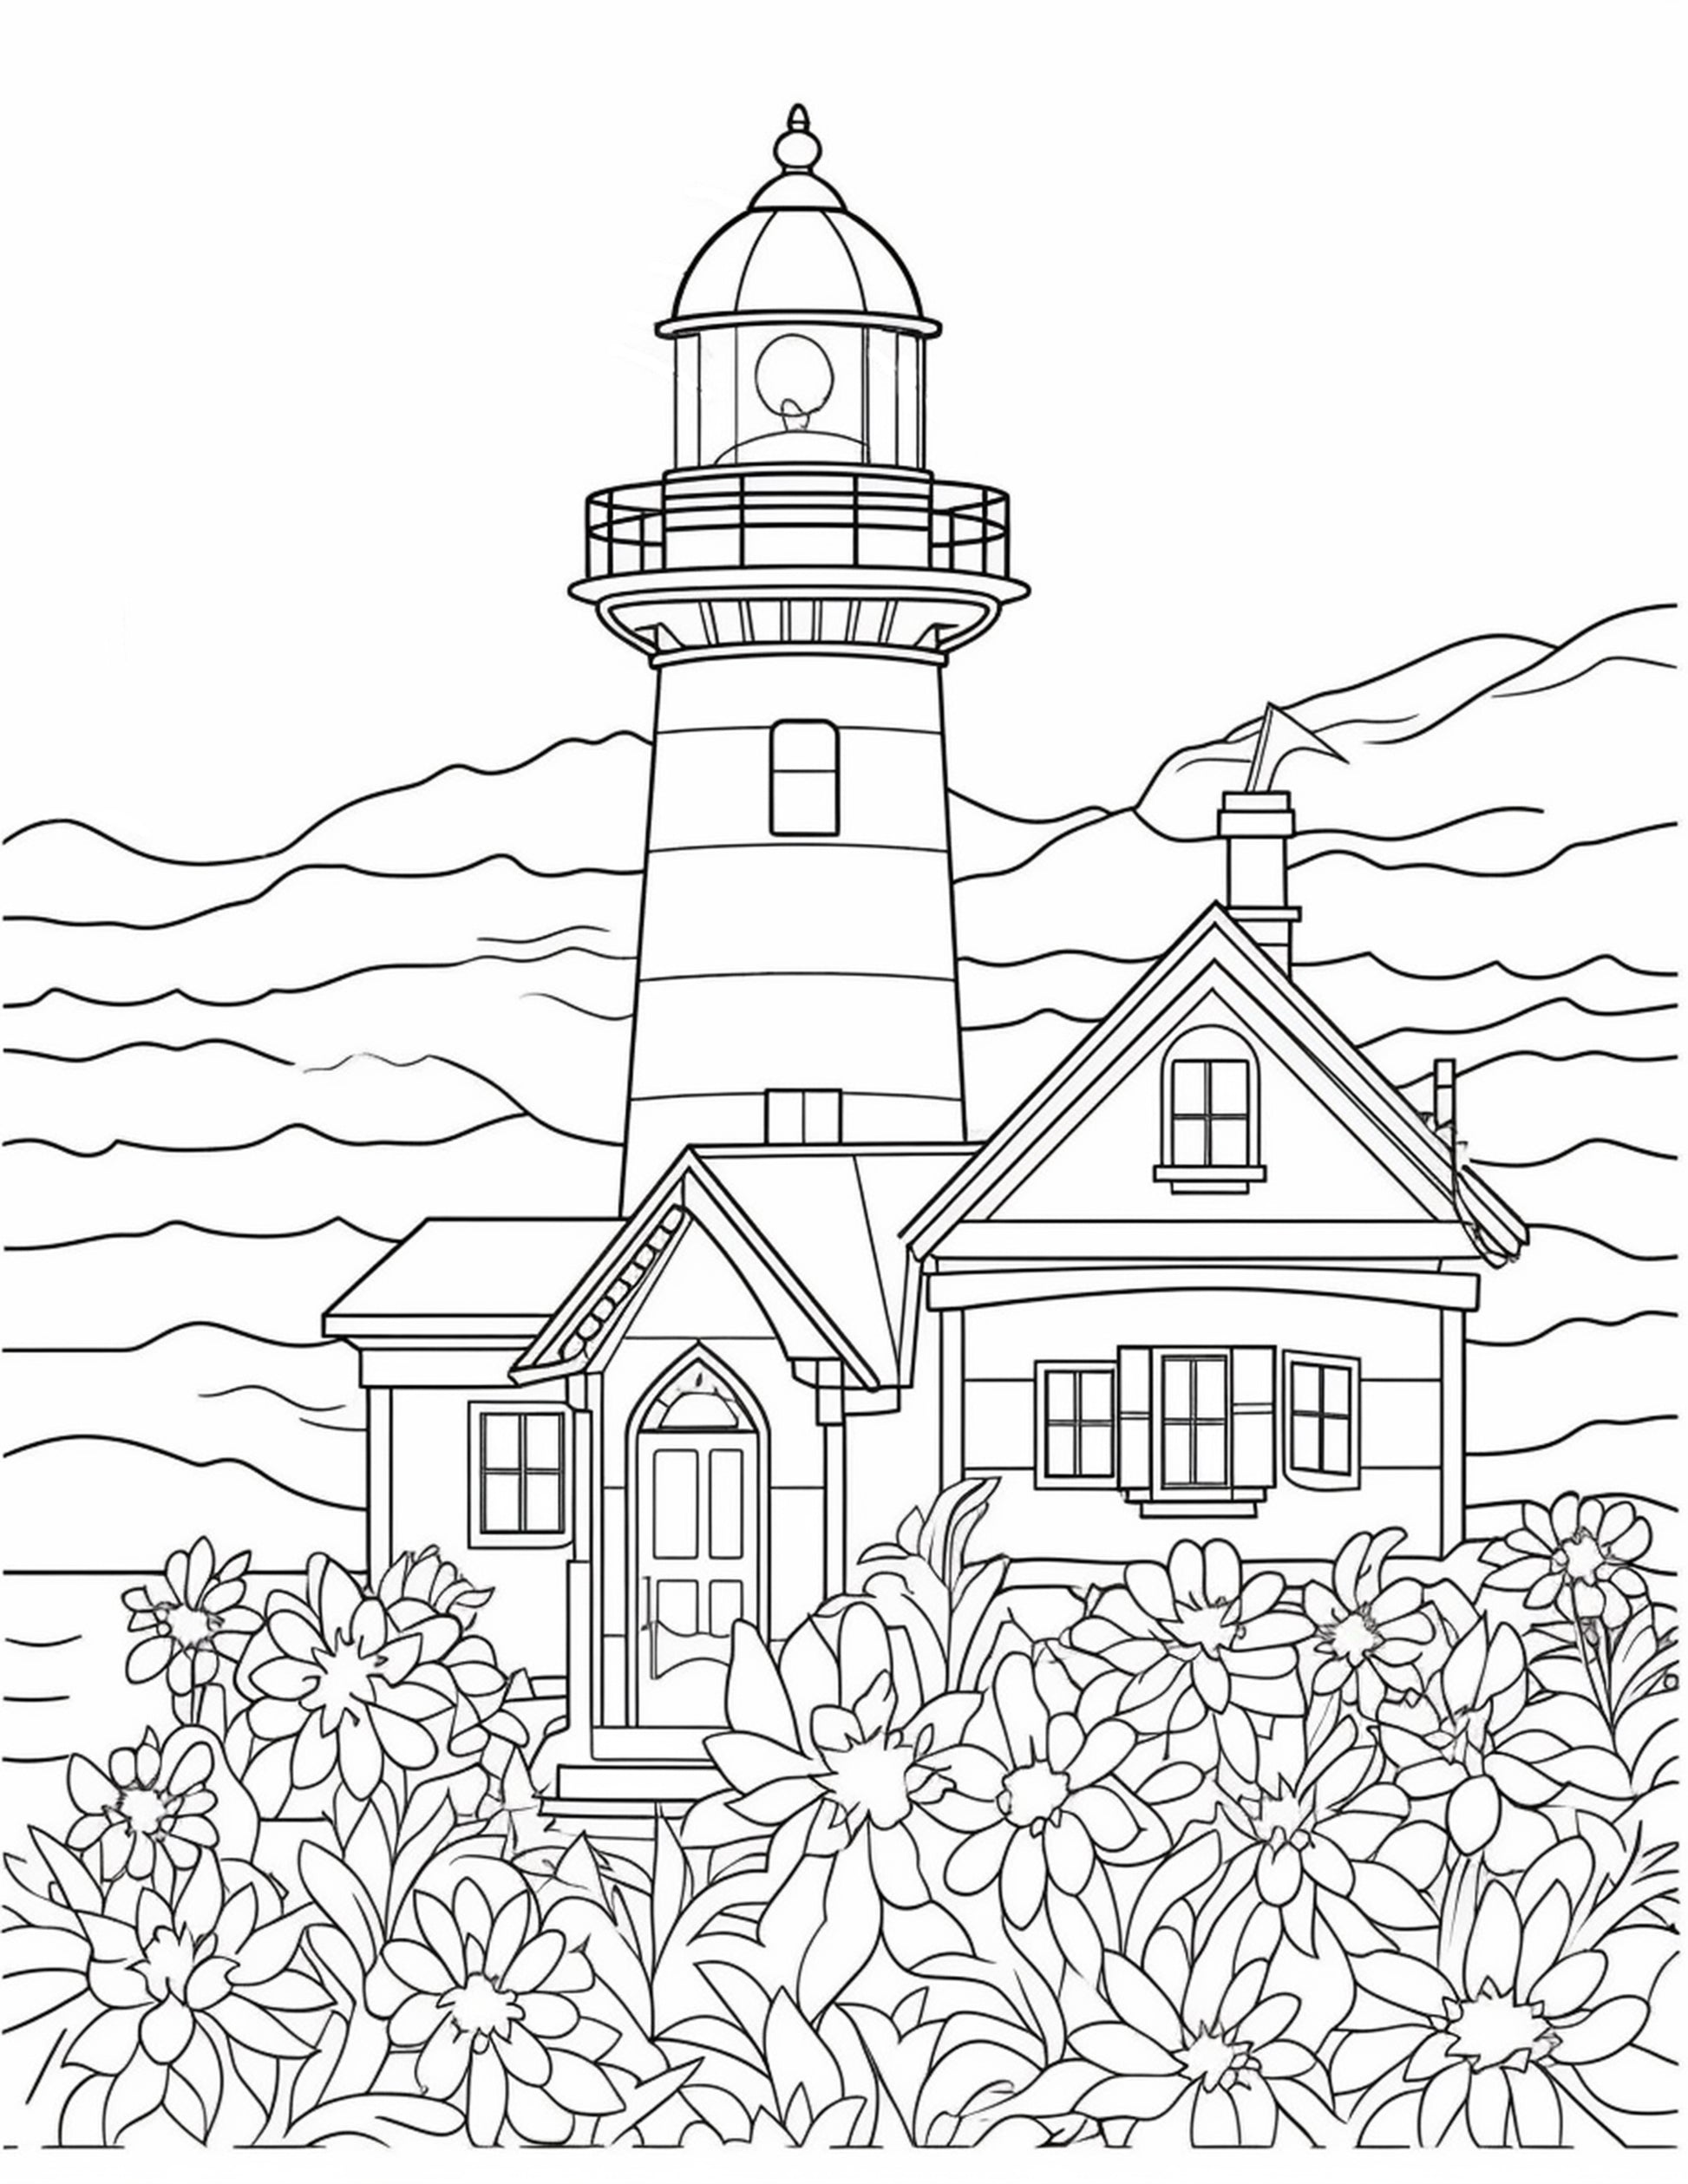 Printable lighthouse scene coloring pages for adults printable pd â coloring